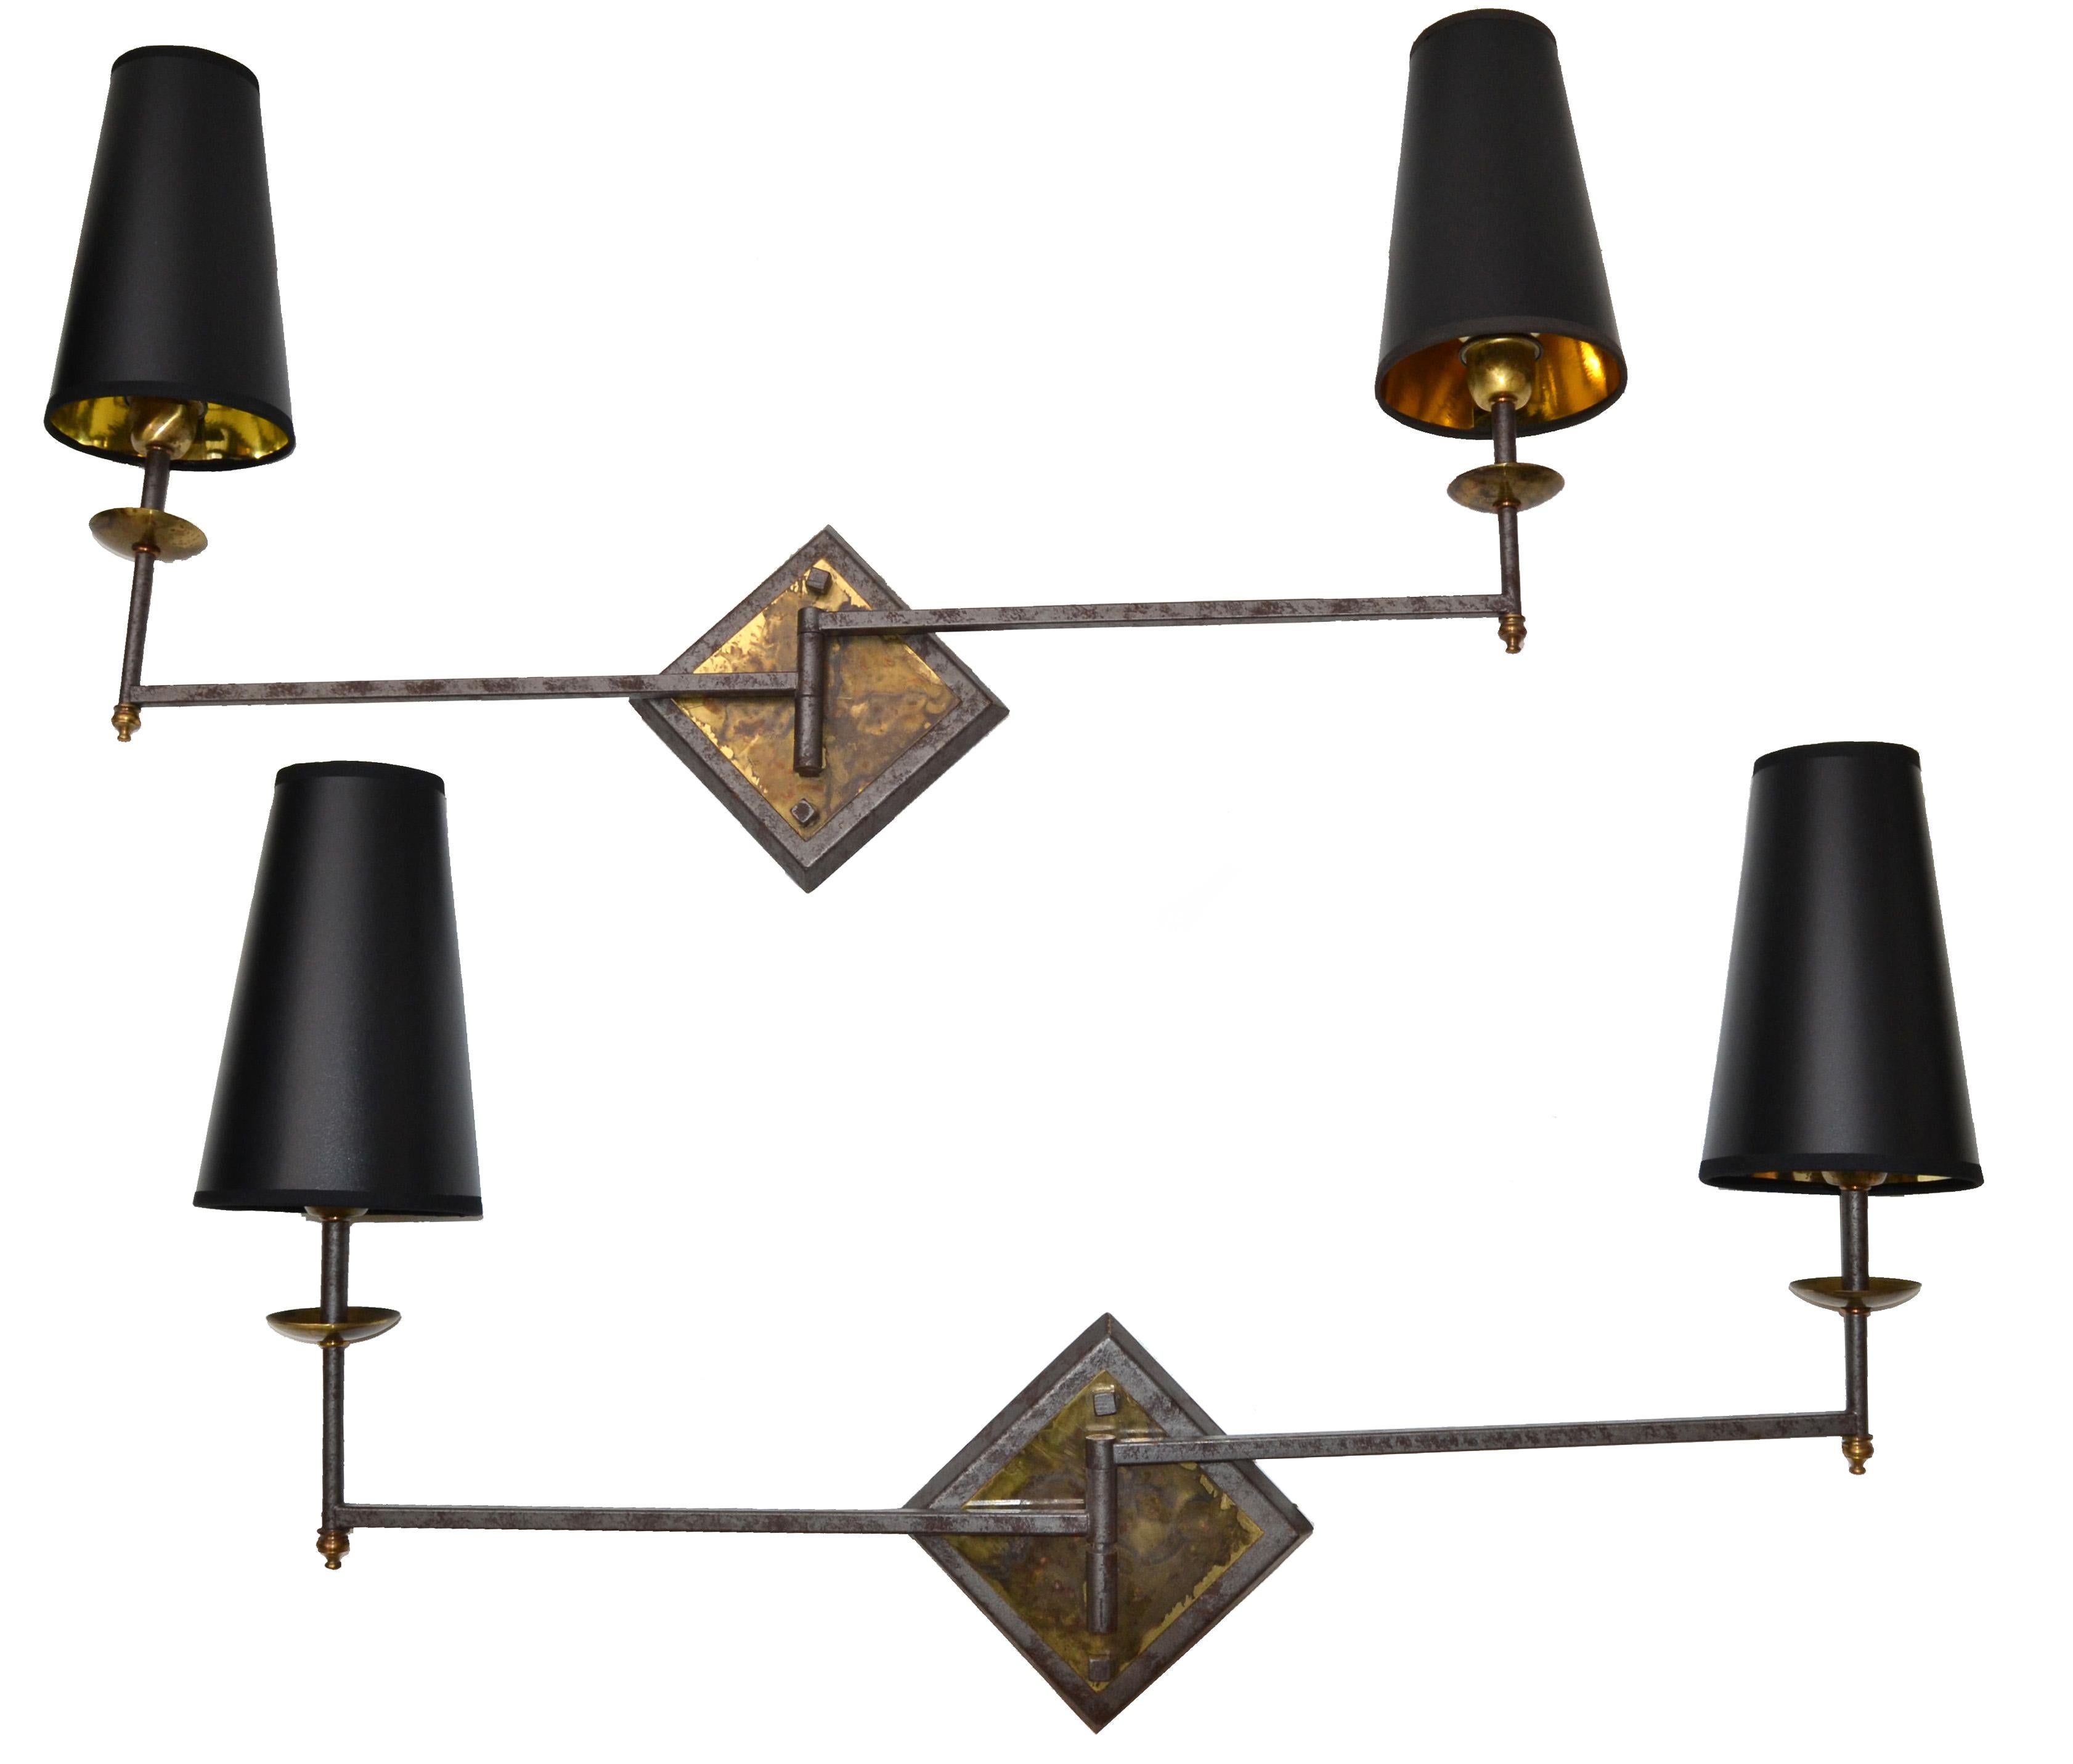 Mid-20th Century French Mid-Century Modern Metal and Brass Swing Arm Sconces, Wall Lights, Pair For Sale